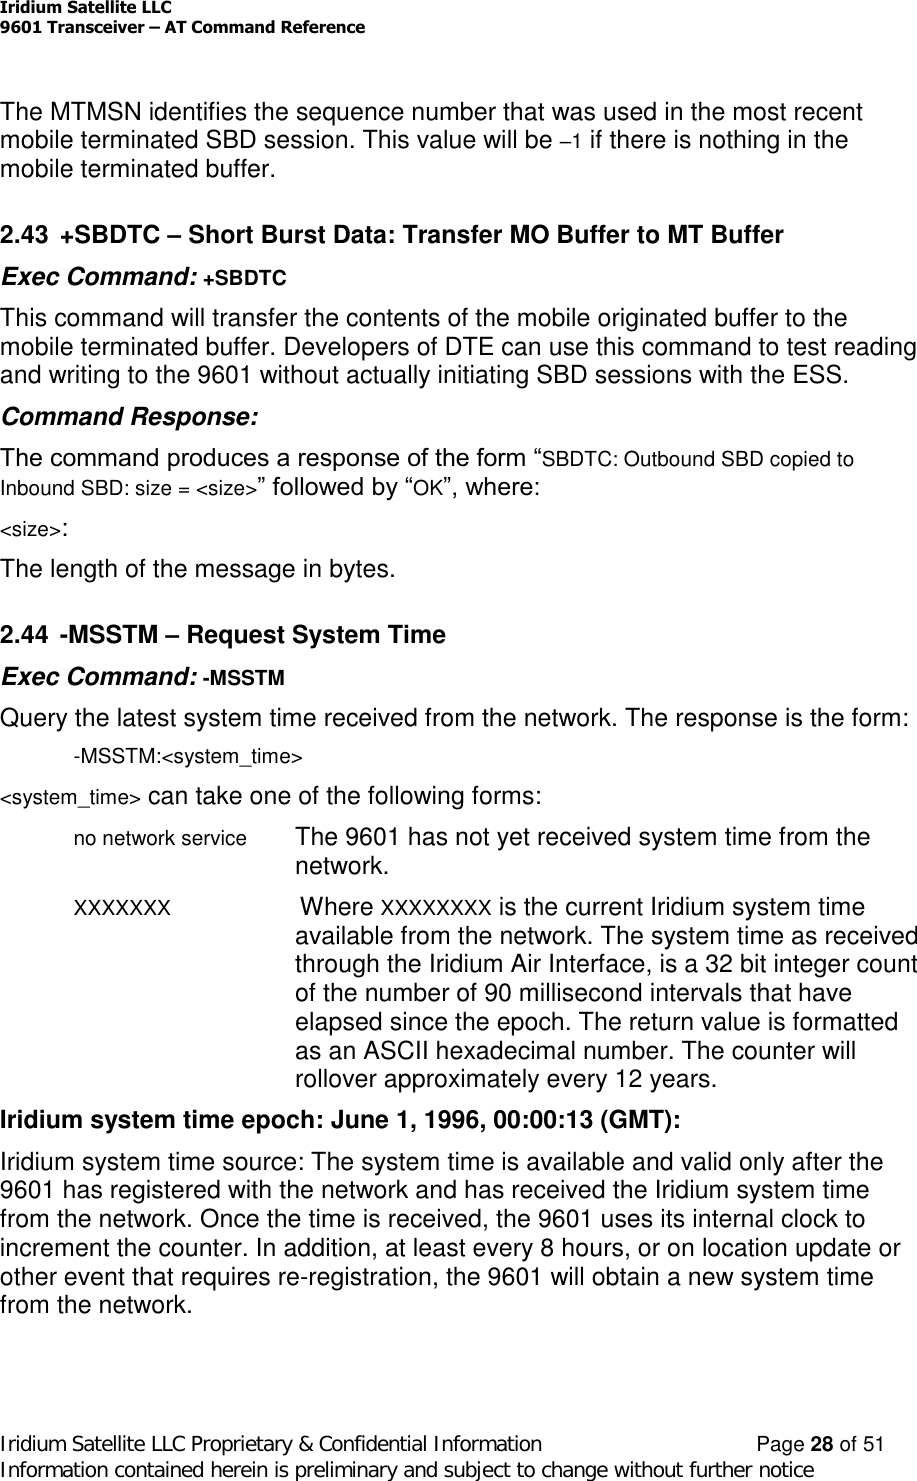 Iridium Satellite LLC9601 Transceiver –AT Command ReferenceIridium Satellite LLC Proprietary &amp; Confidential Information Page 28 of 51Information contained herein is preliminary and subject to change without further noticeThe MTMSN identifies the sequence number that was used in the most recentmobile terminated SBD session. This value will be –1if there is nothing in themobile terminated buffer.2.43 +SBDTC –Short Burst Data: Transfer MO Buffer to MT BufferExec Command: +SBDTCThis command will transfer the contents of the mobile originated buffer to themobile terminated buffer. Developers of DTE can use this command to test readingand writing to the 9601 without actually initiating SBD sessions with the ESS.Command Response:The command produces a response of the form “SBDTC: Outbound SBD copied toInbound SBD: size = &lt;size&gt;” followed by “OK”, where:&lt;size&gt;:The length of the message in bytes.2.44 -MSSTM –Request System TimeExec Command: -MSSTMQuery the latest system time received from the network. The response is the form:-MSSTM:&lt;system_time&gt;&lt;system_time&gt; can take one of the following forms:no network service The 9601 has not yet received system time from thenetwork.XXXXXXX Where XXXXXXXX is the current Iridium system timeavailable from the network. The system time as receivedthrough the Iridium Air Interface, is a 32 bit integer countof the number of 90 millisecond intervals that haveelapsed since the epoch. The return value is formattedas an ASCII hexadecimal number. The counter willrollover approximately every 12 years.Iridium system time epoch: June 1, 1996, 00:00:13 (GMT):Iridium system time source: The system time is available and valid only after the9601 has registered with the network and has received the Iridium system timefrom the network. Once the time is received, the 9601 uses its internal clock toincrement the counter. In addition, at least every 8 hours, or on location update orother event that requires re-registration, the 9601 will obtain a new system timefrom the network.